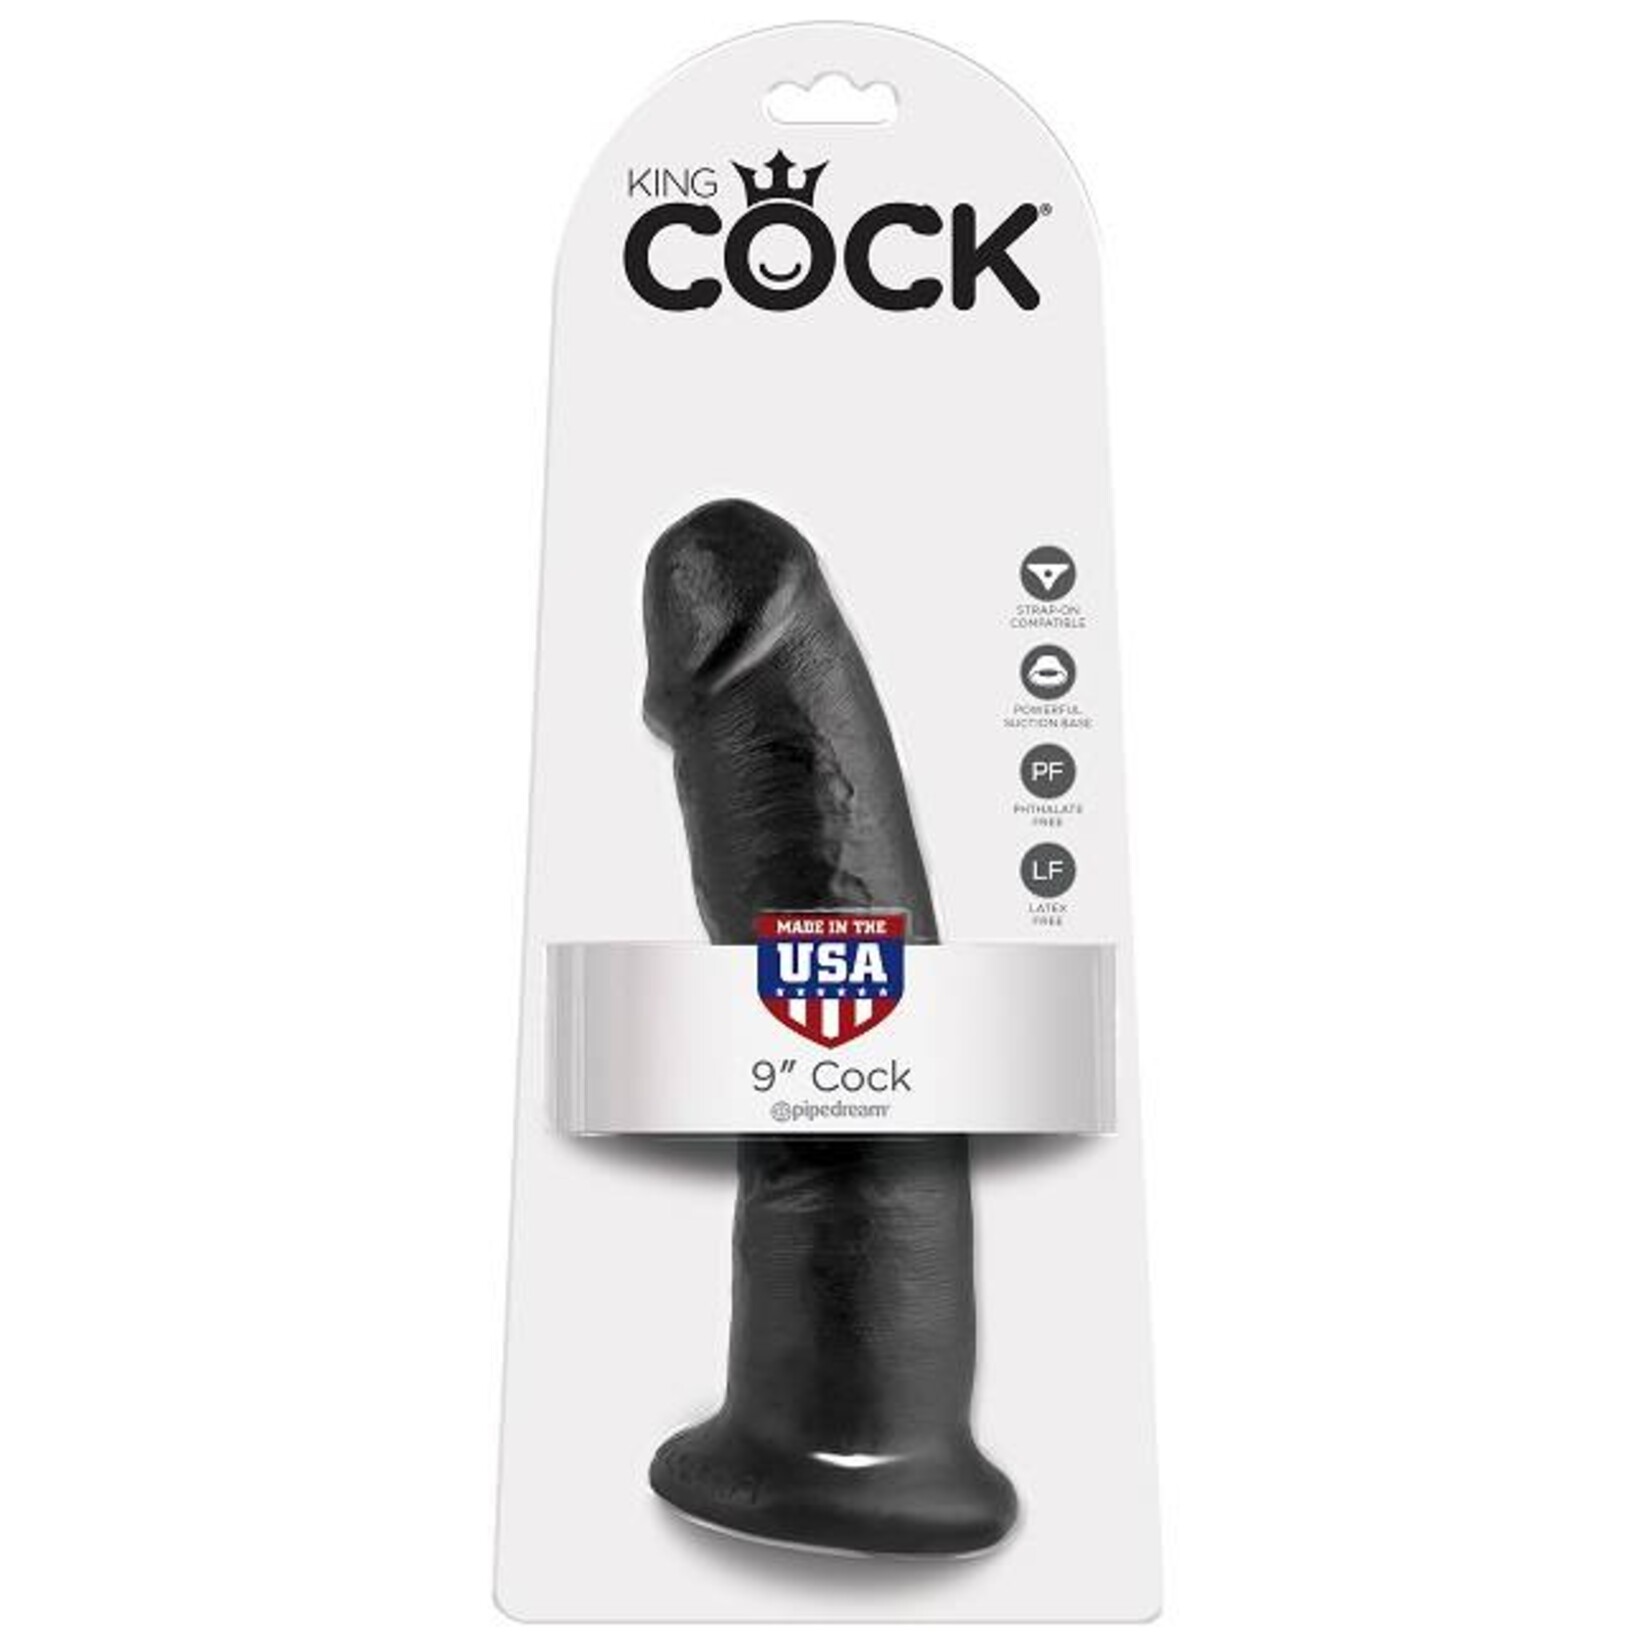 Pipedream King Cock 9" Cock